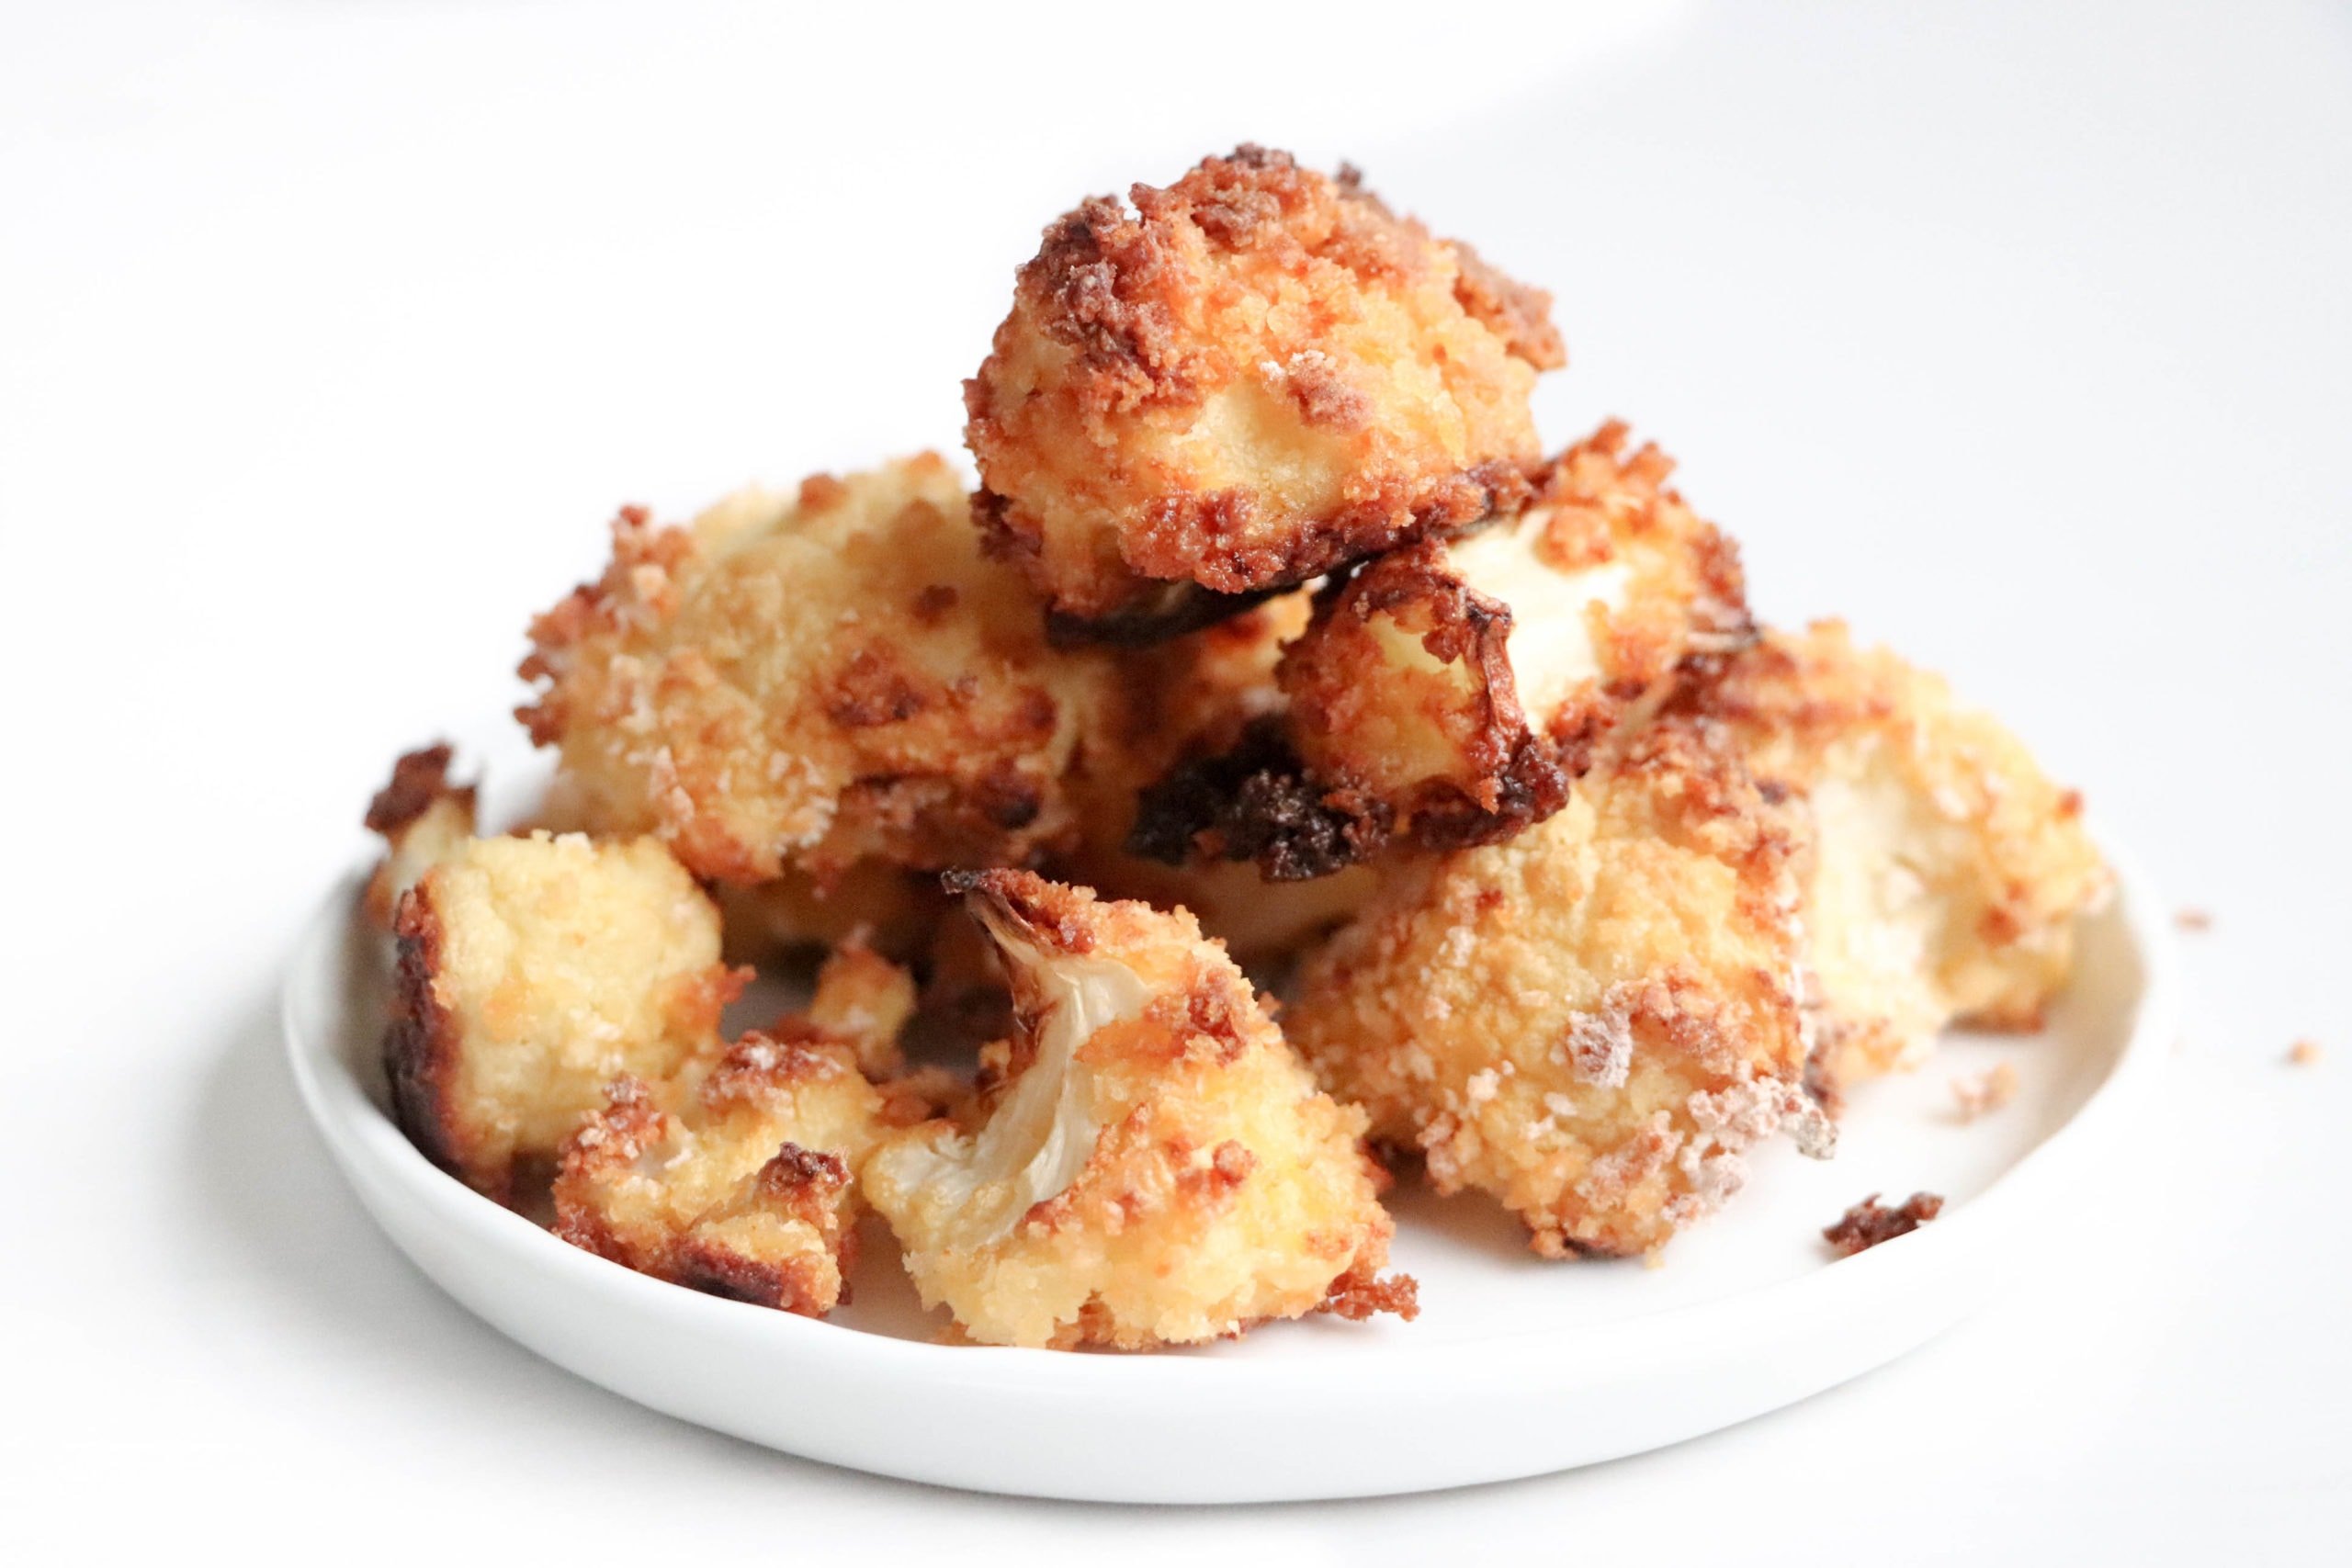 Crispy baked cauliflower on a white plate over a white surface.